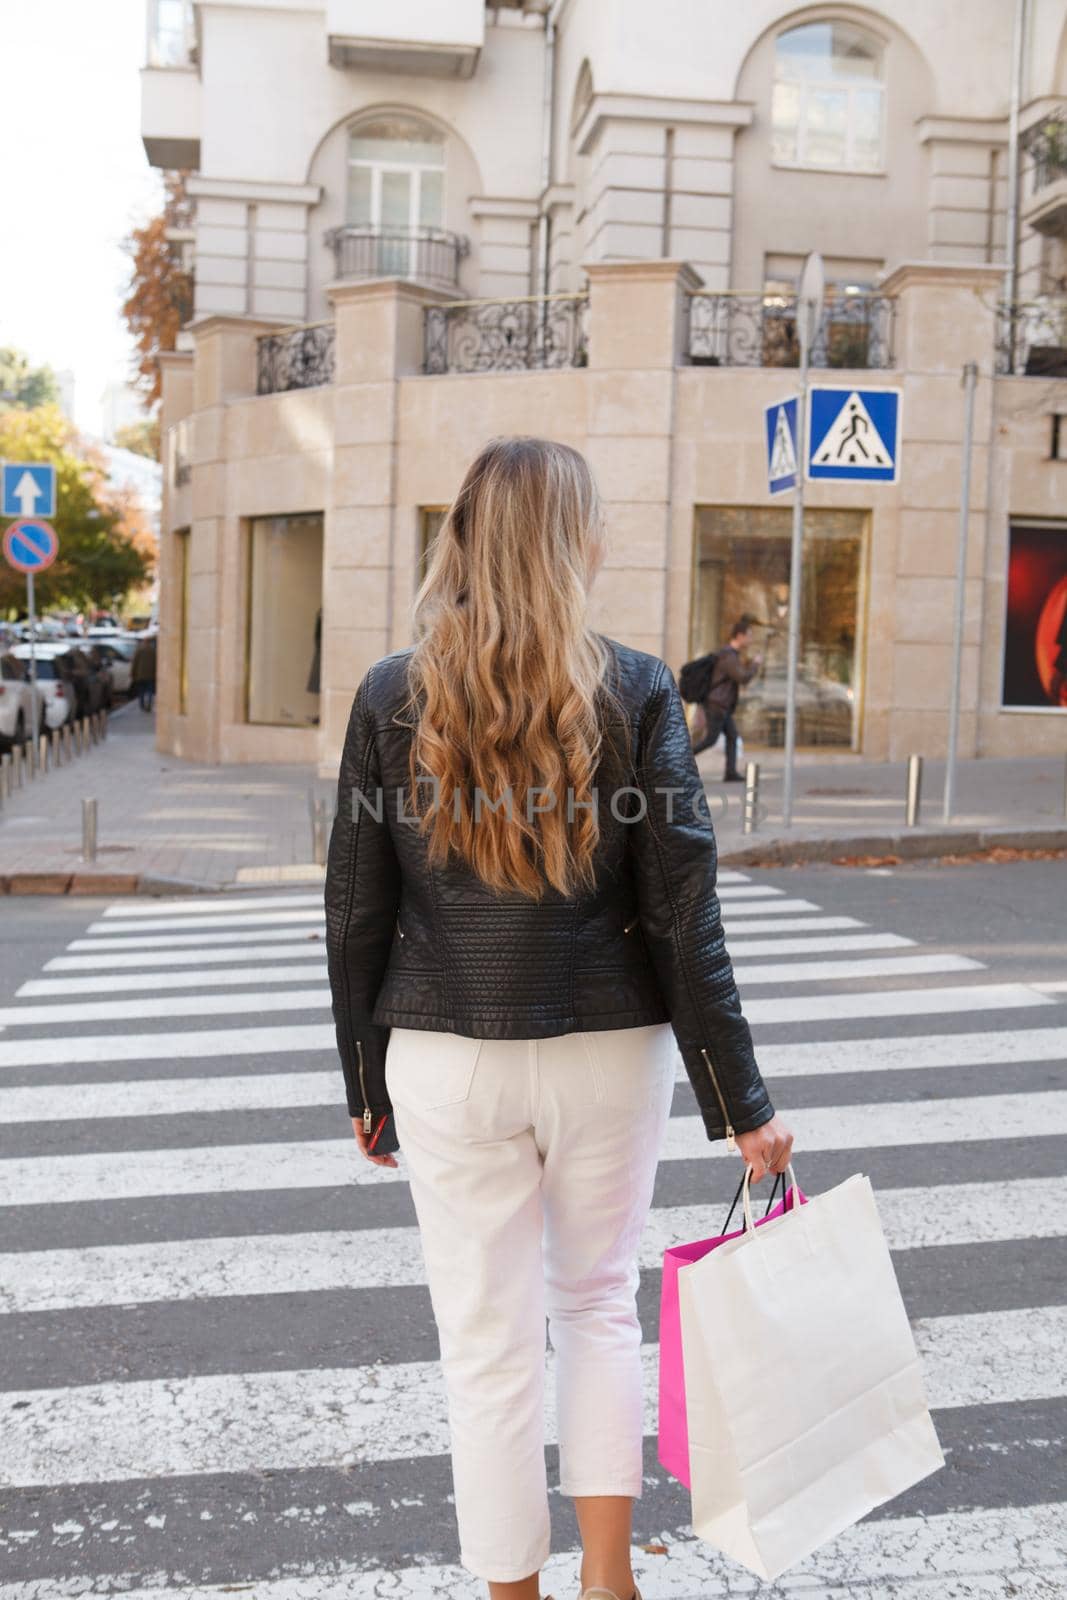 Vertical cropped rear view shot of a woman walking with shopping bags in the city on crosswalk